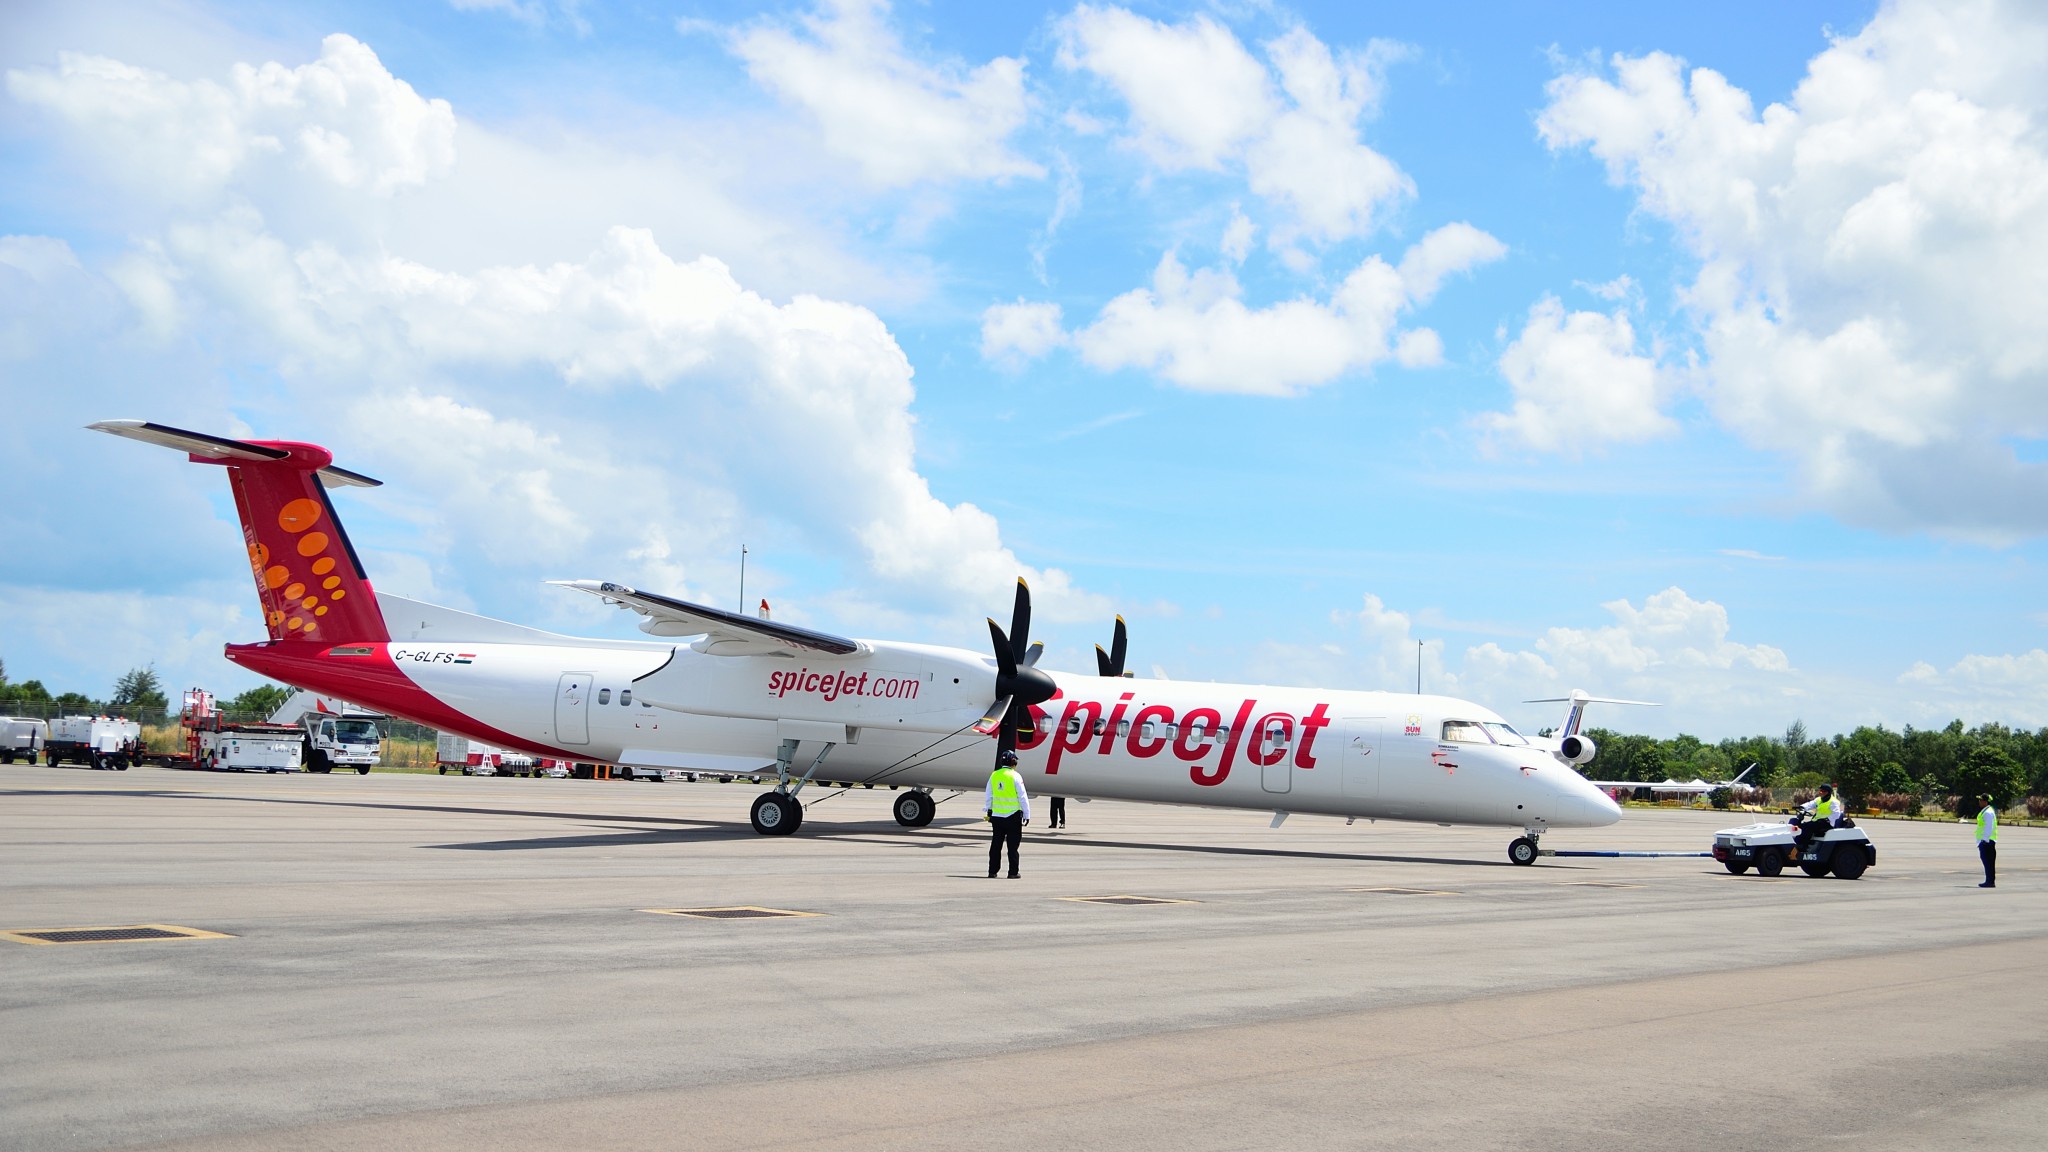 Dowty Propellers extends contract with SpiceJet for fleet of Bombardier Q400 regional airliners